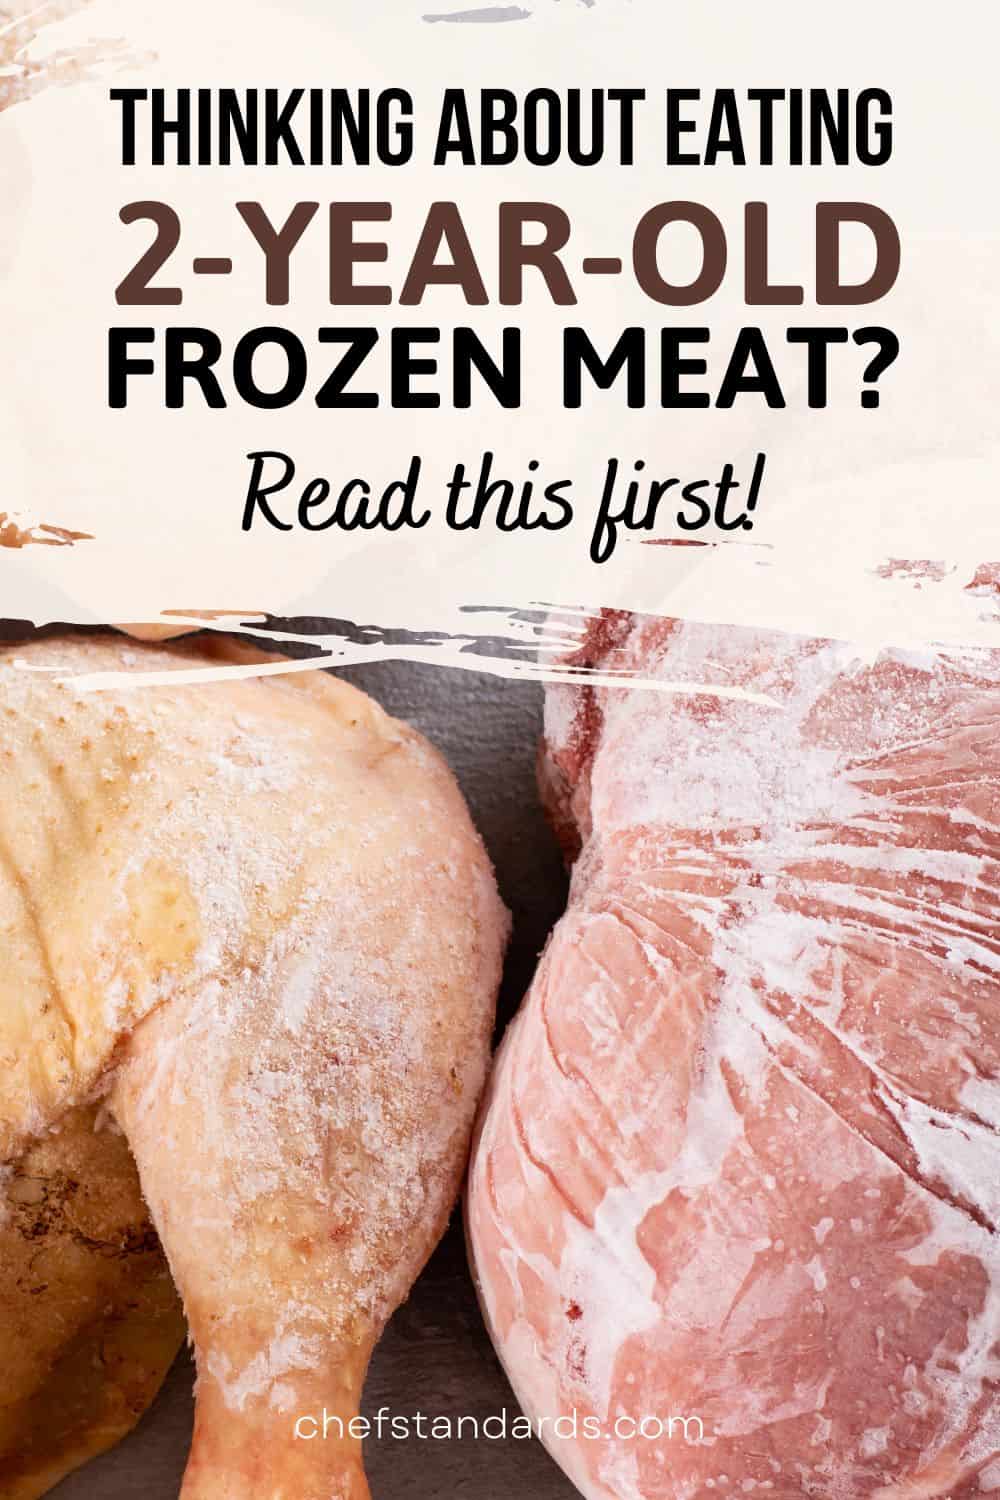 Is It Safe To Eat 2 Year Old Frozen Meat + Other FAQs
